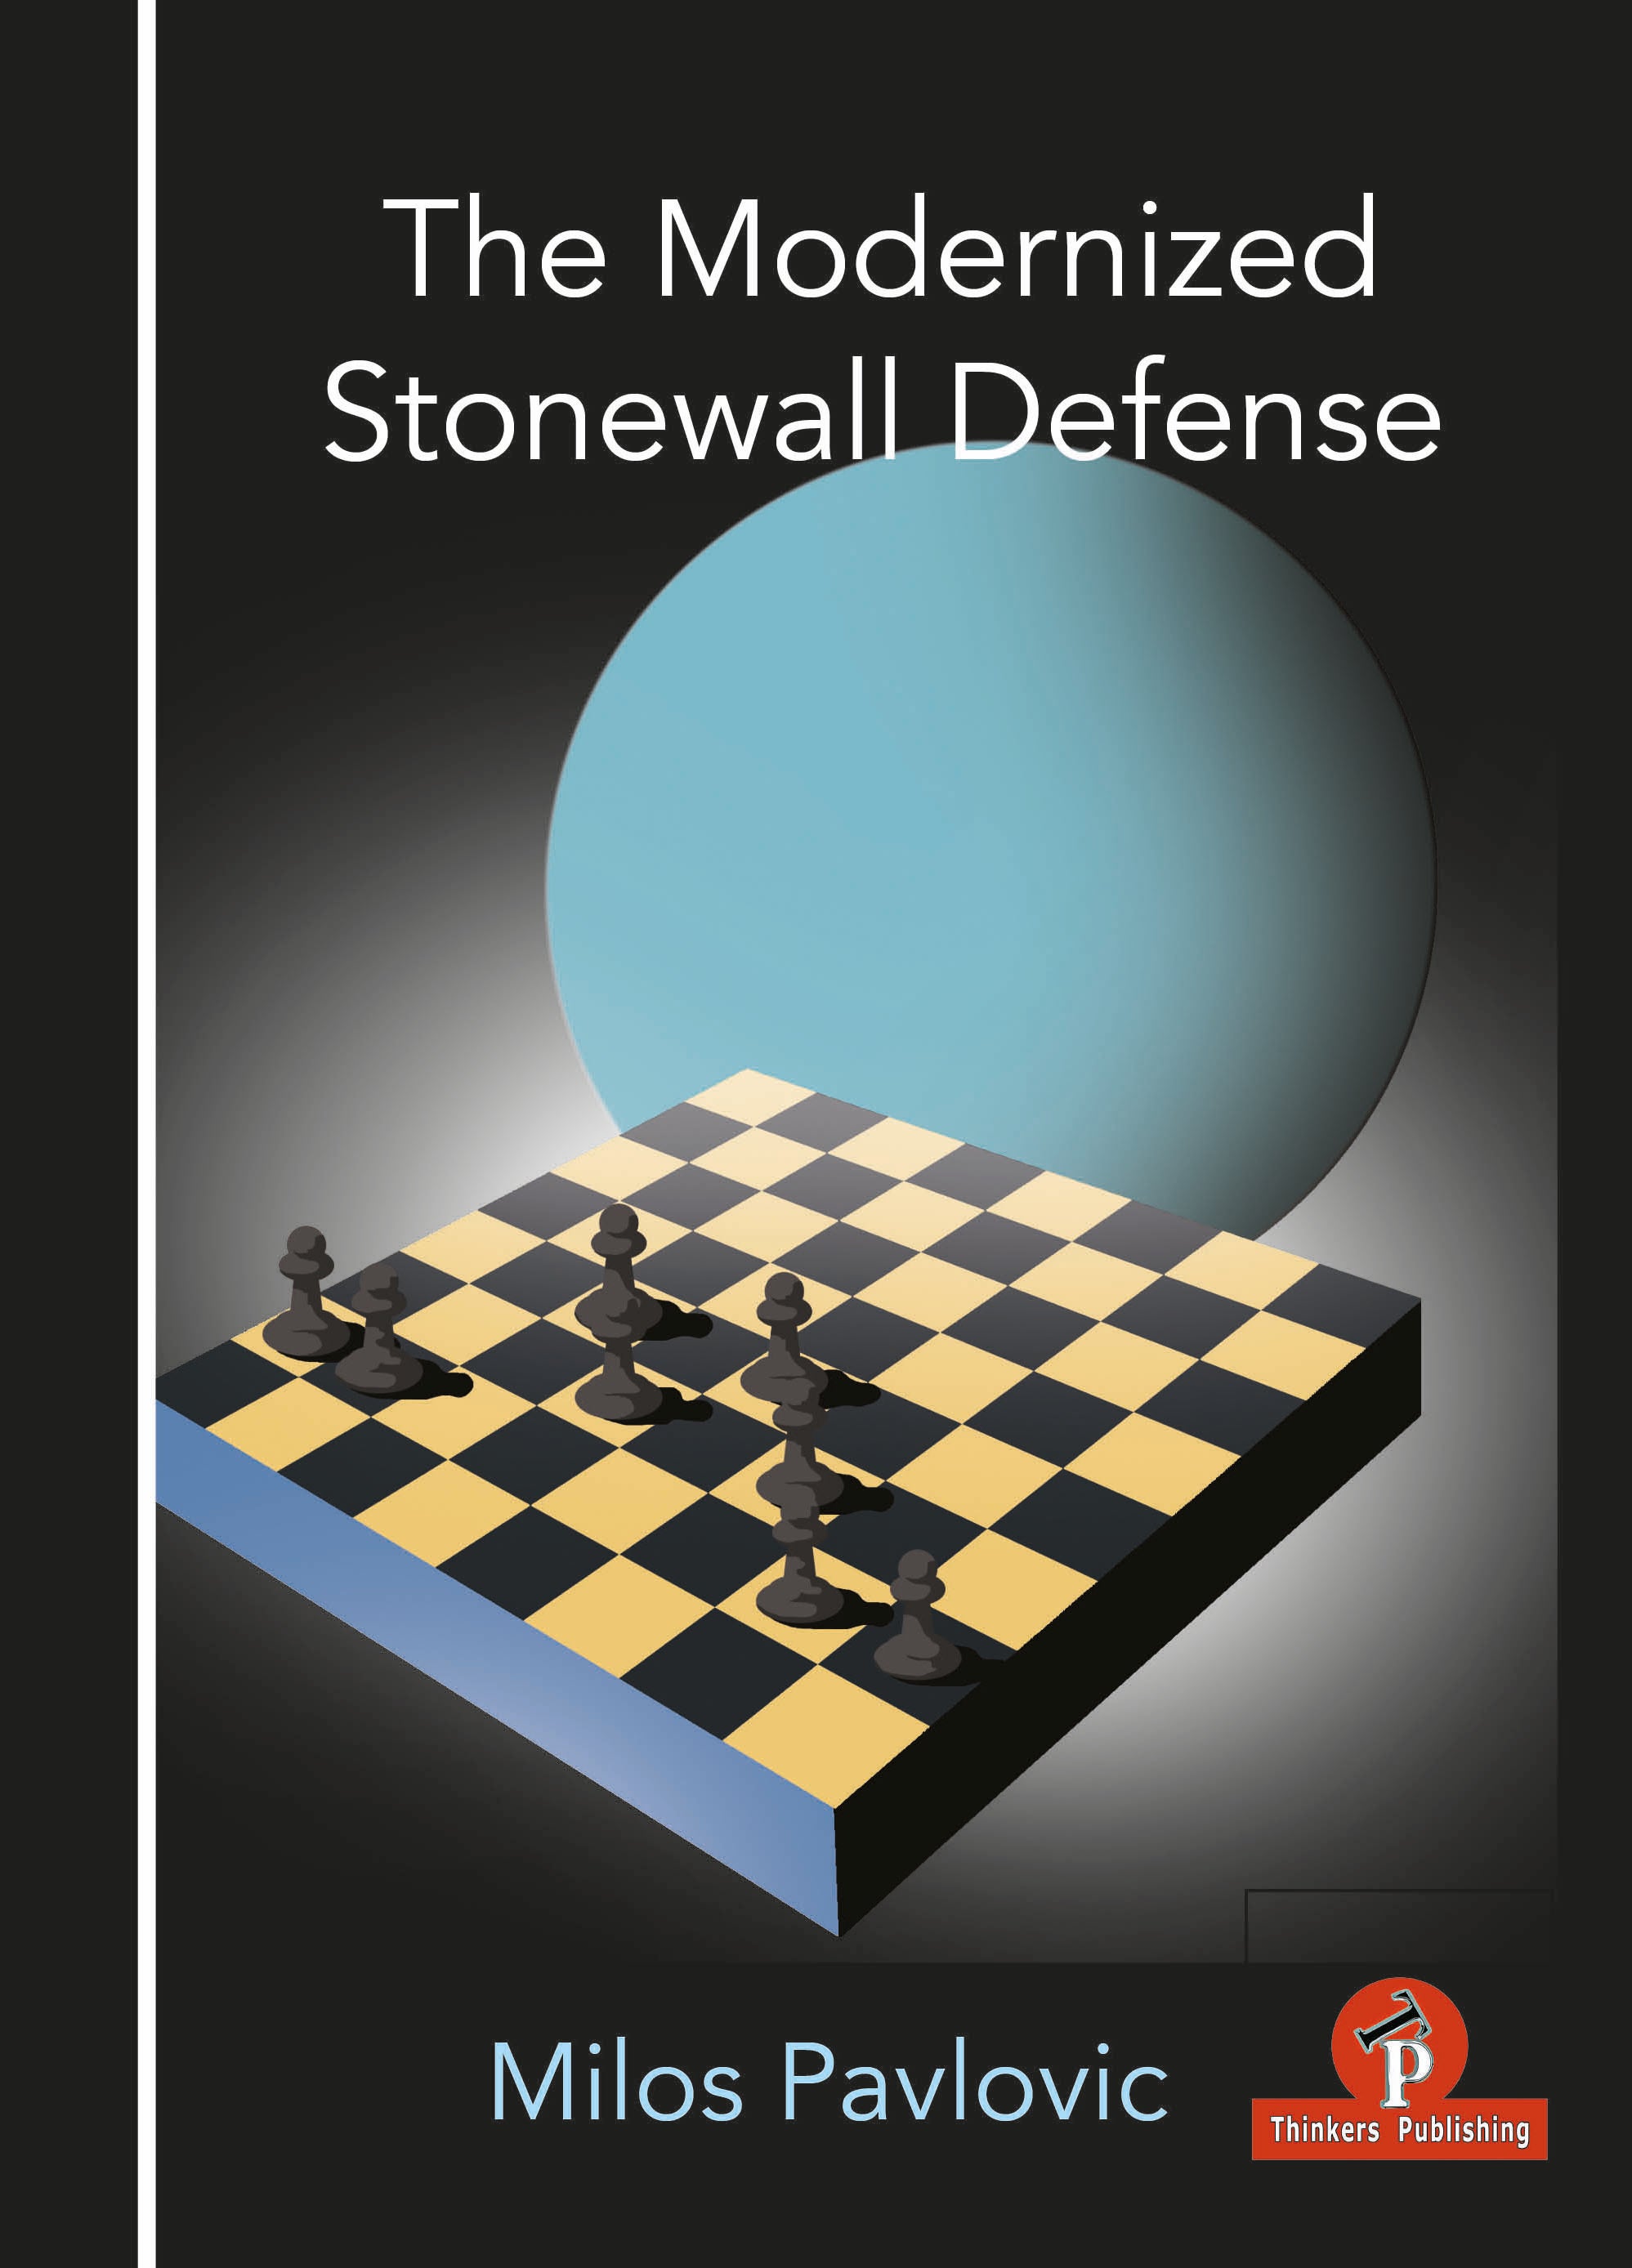 A Practical Black Repertoire with Nf6, g6, d6 - English, Pirc, Reti and  Other Defences - Vol. 1